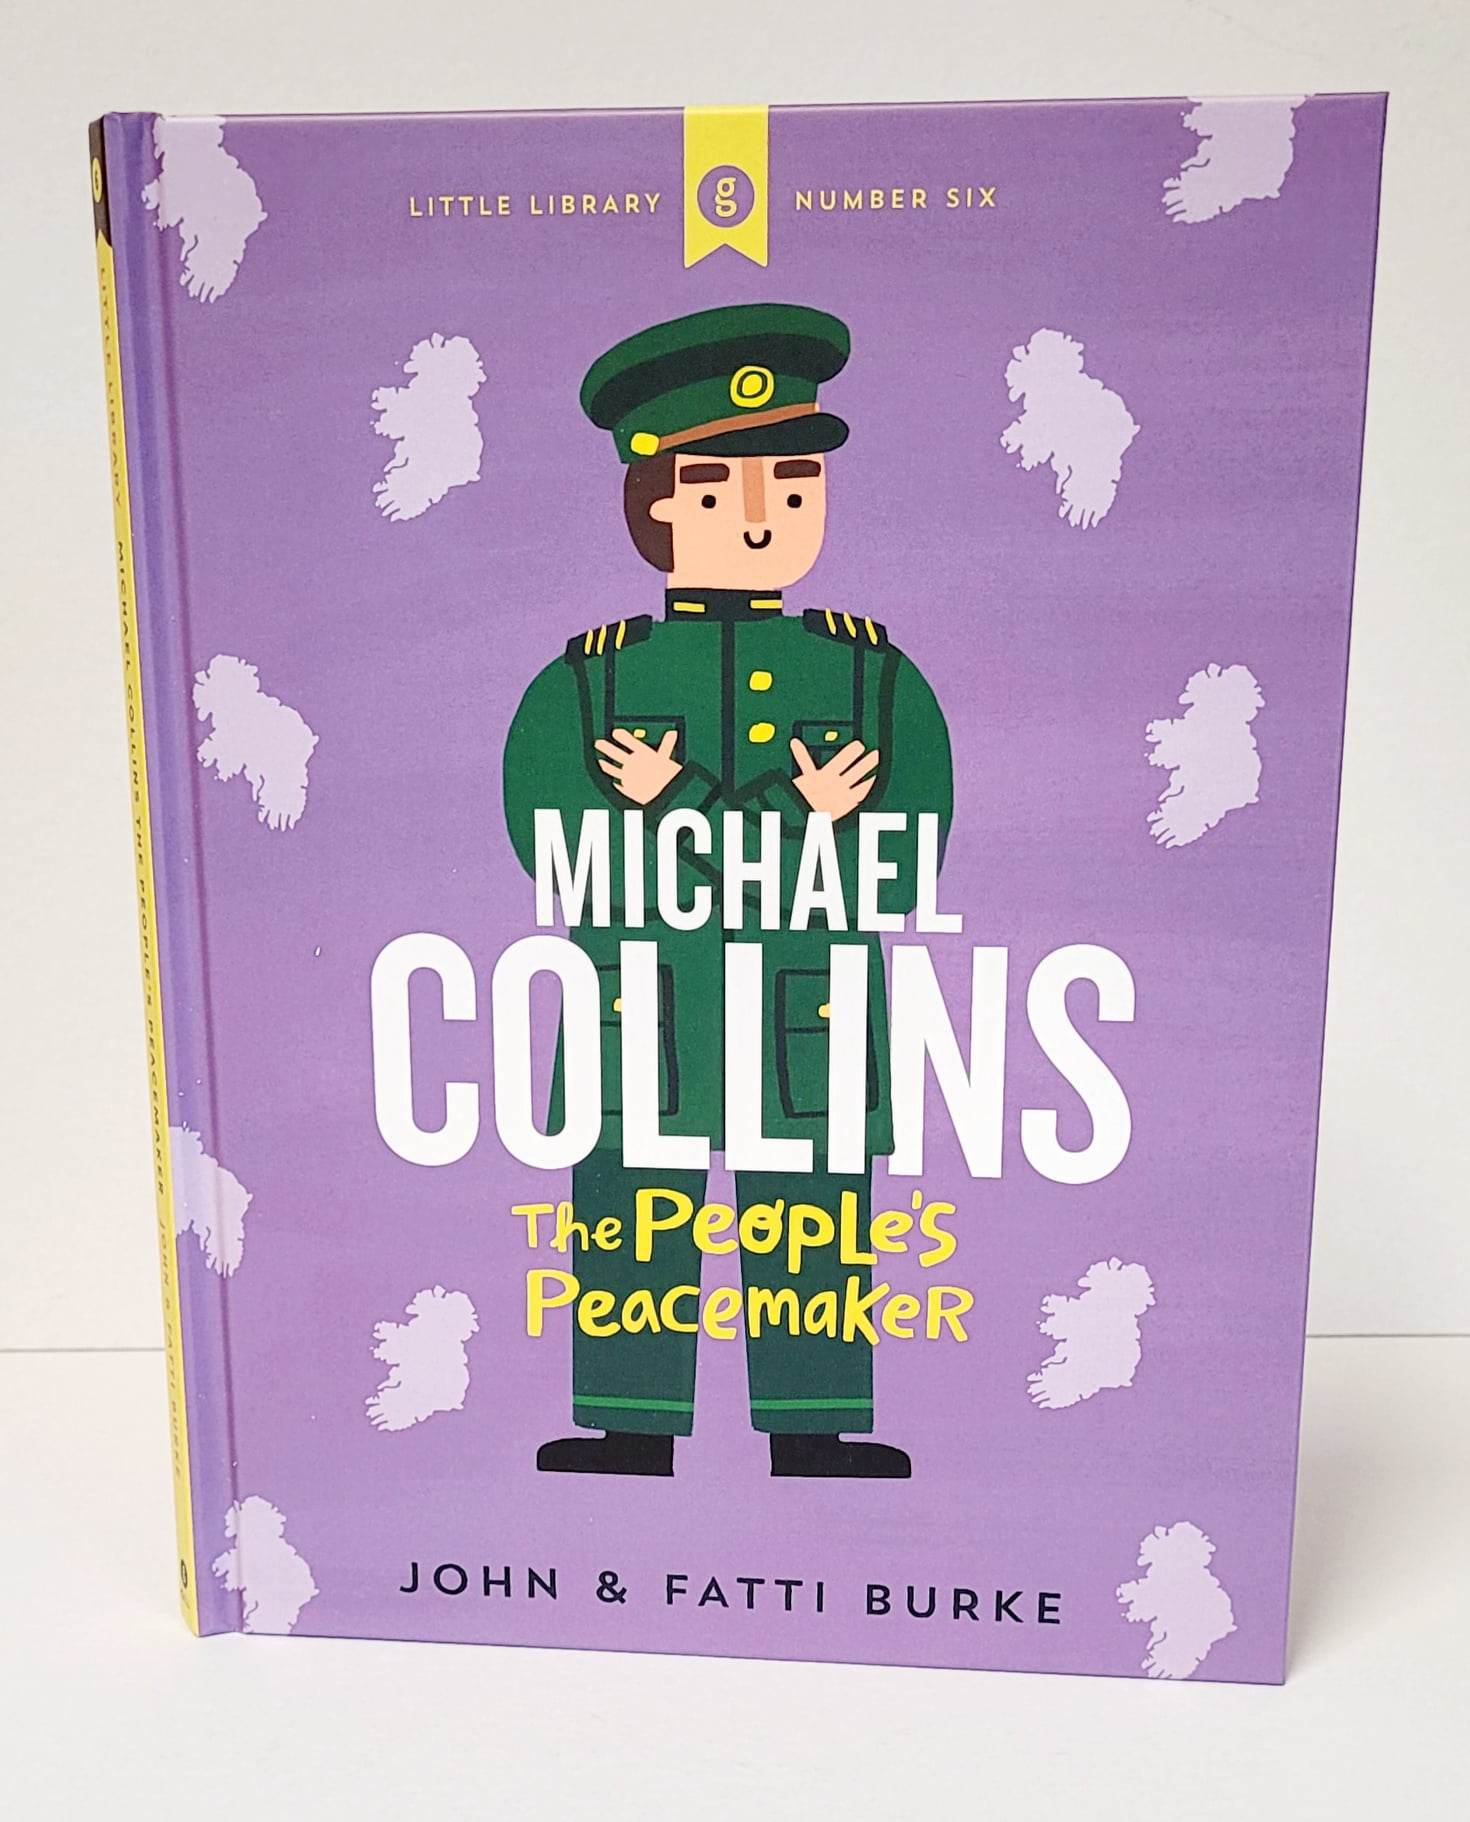 Michael Collins The Peoples Peacemaker by John & Fatti Burke